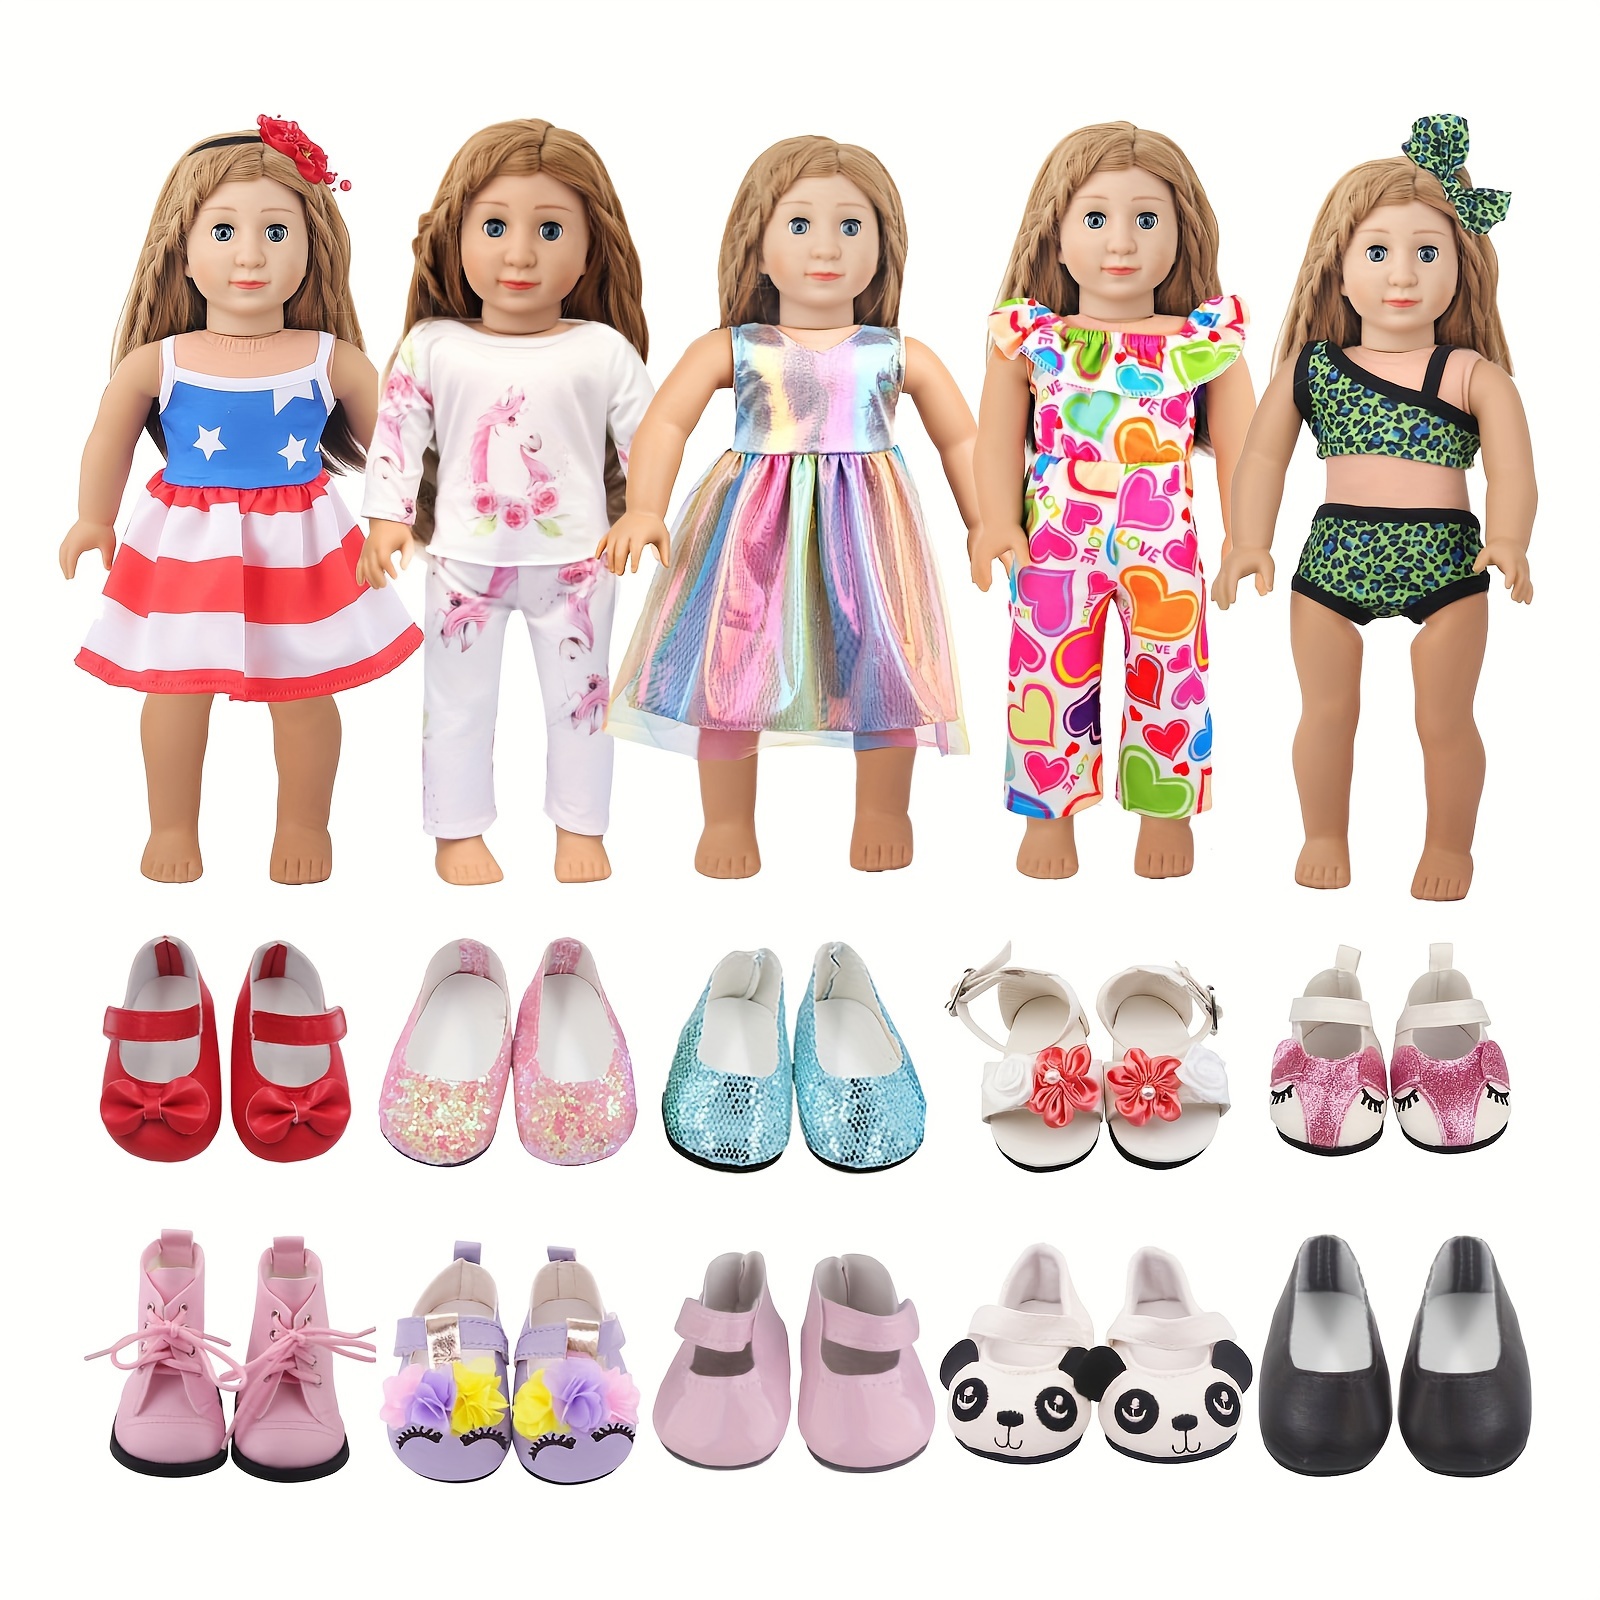 

13pcs 18 Inch Doll Accessories, 5 Sets Of Doll Clothes And 2 Pairs Of Doll Shoes (send By Random) For 18 Inch American Doll, Best Birthday Festivals For Kid, Gril